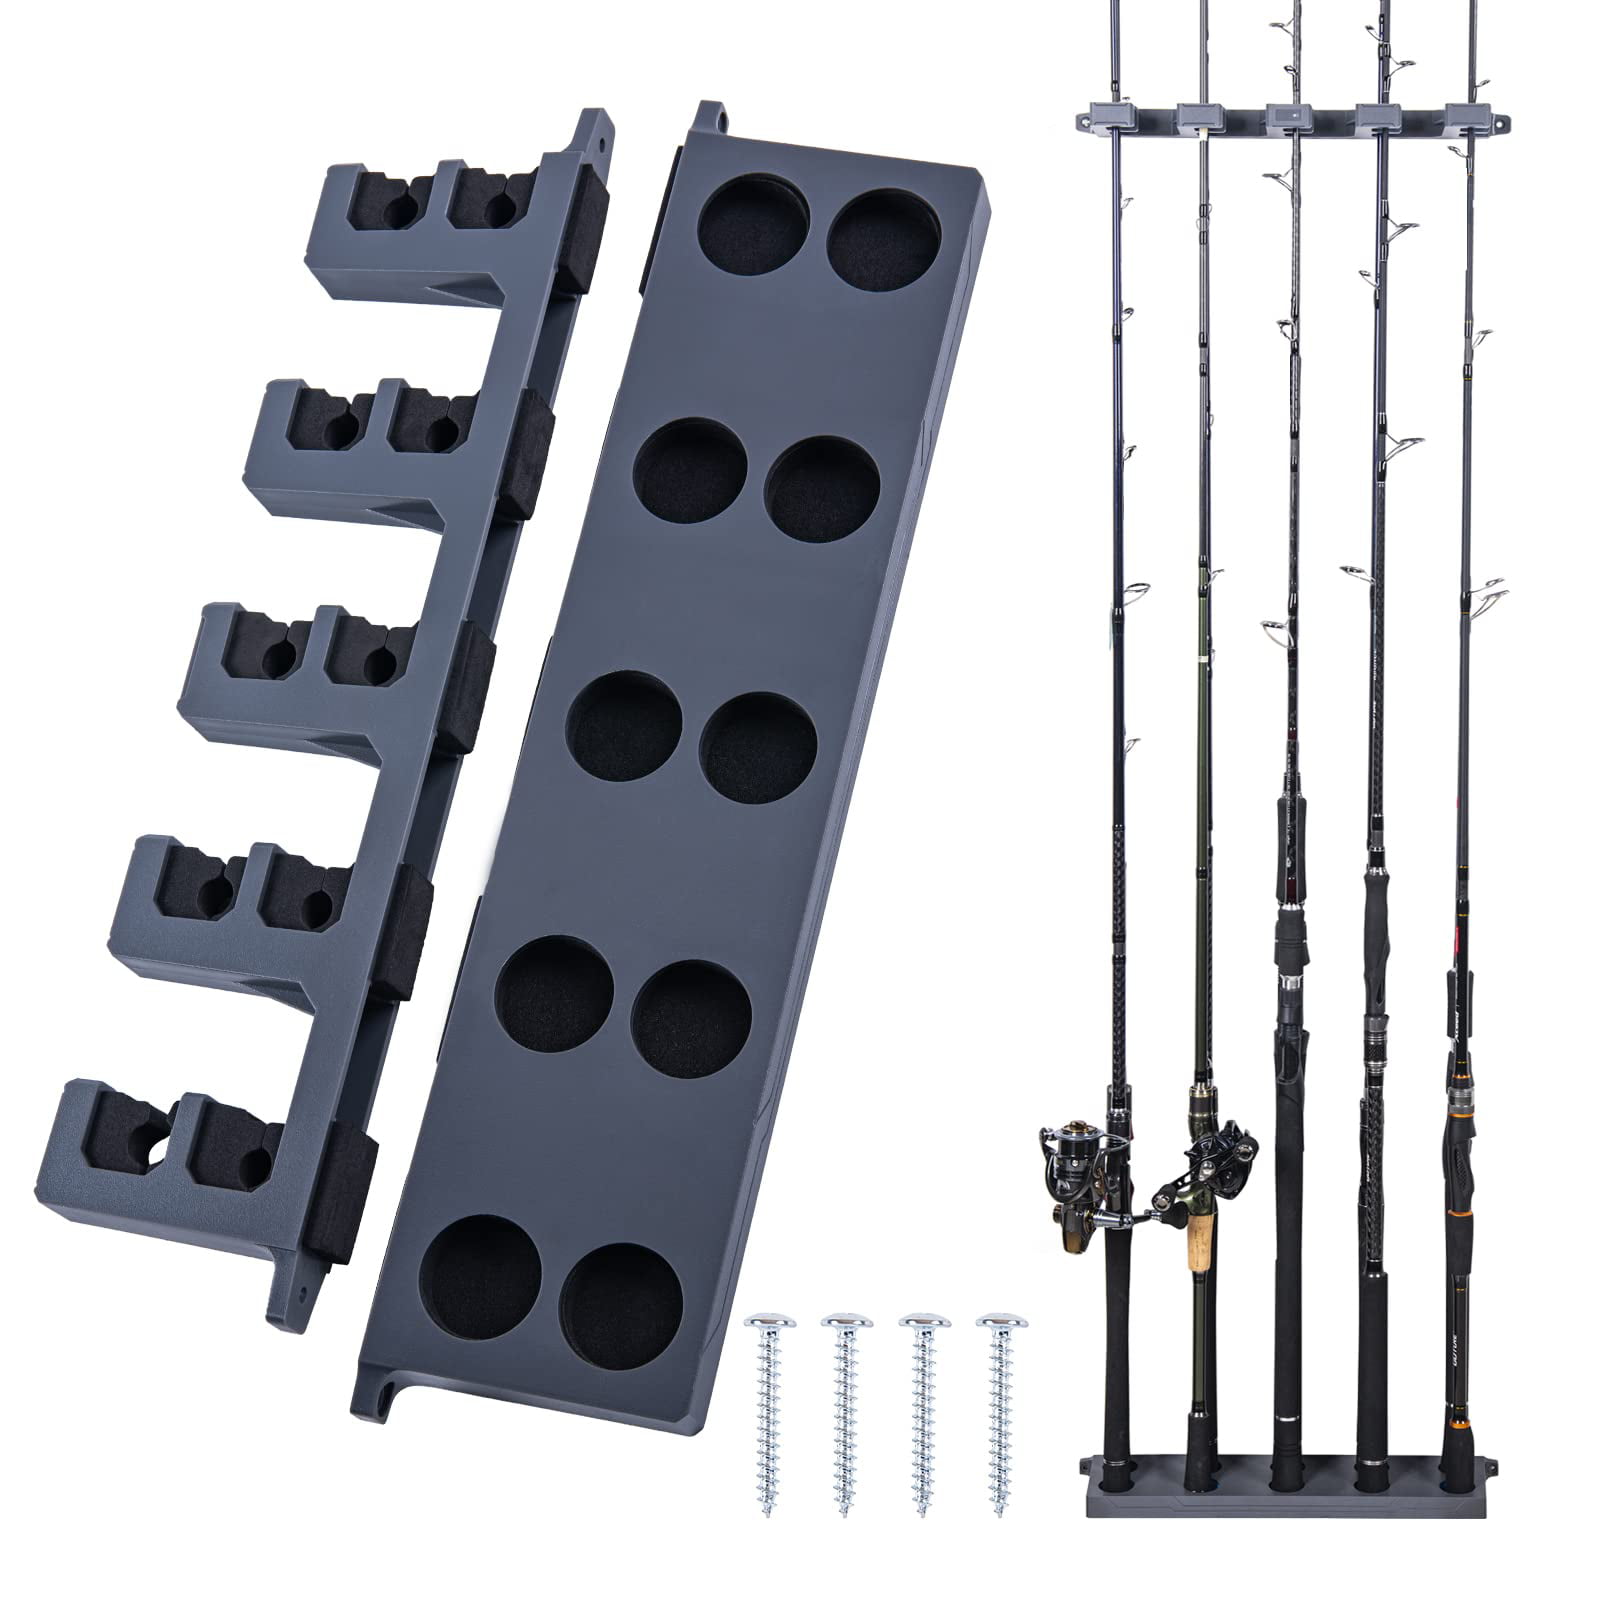 Goture Vertical Fishing Rod Holder, Wall Mounted Fishing Rod Storage Rack,  Hold up to 10 Rods and 5 Combos,Fit Most Rods of Diameter 5-13mm(Black